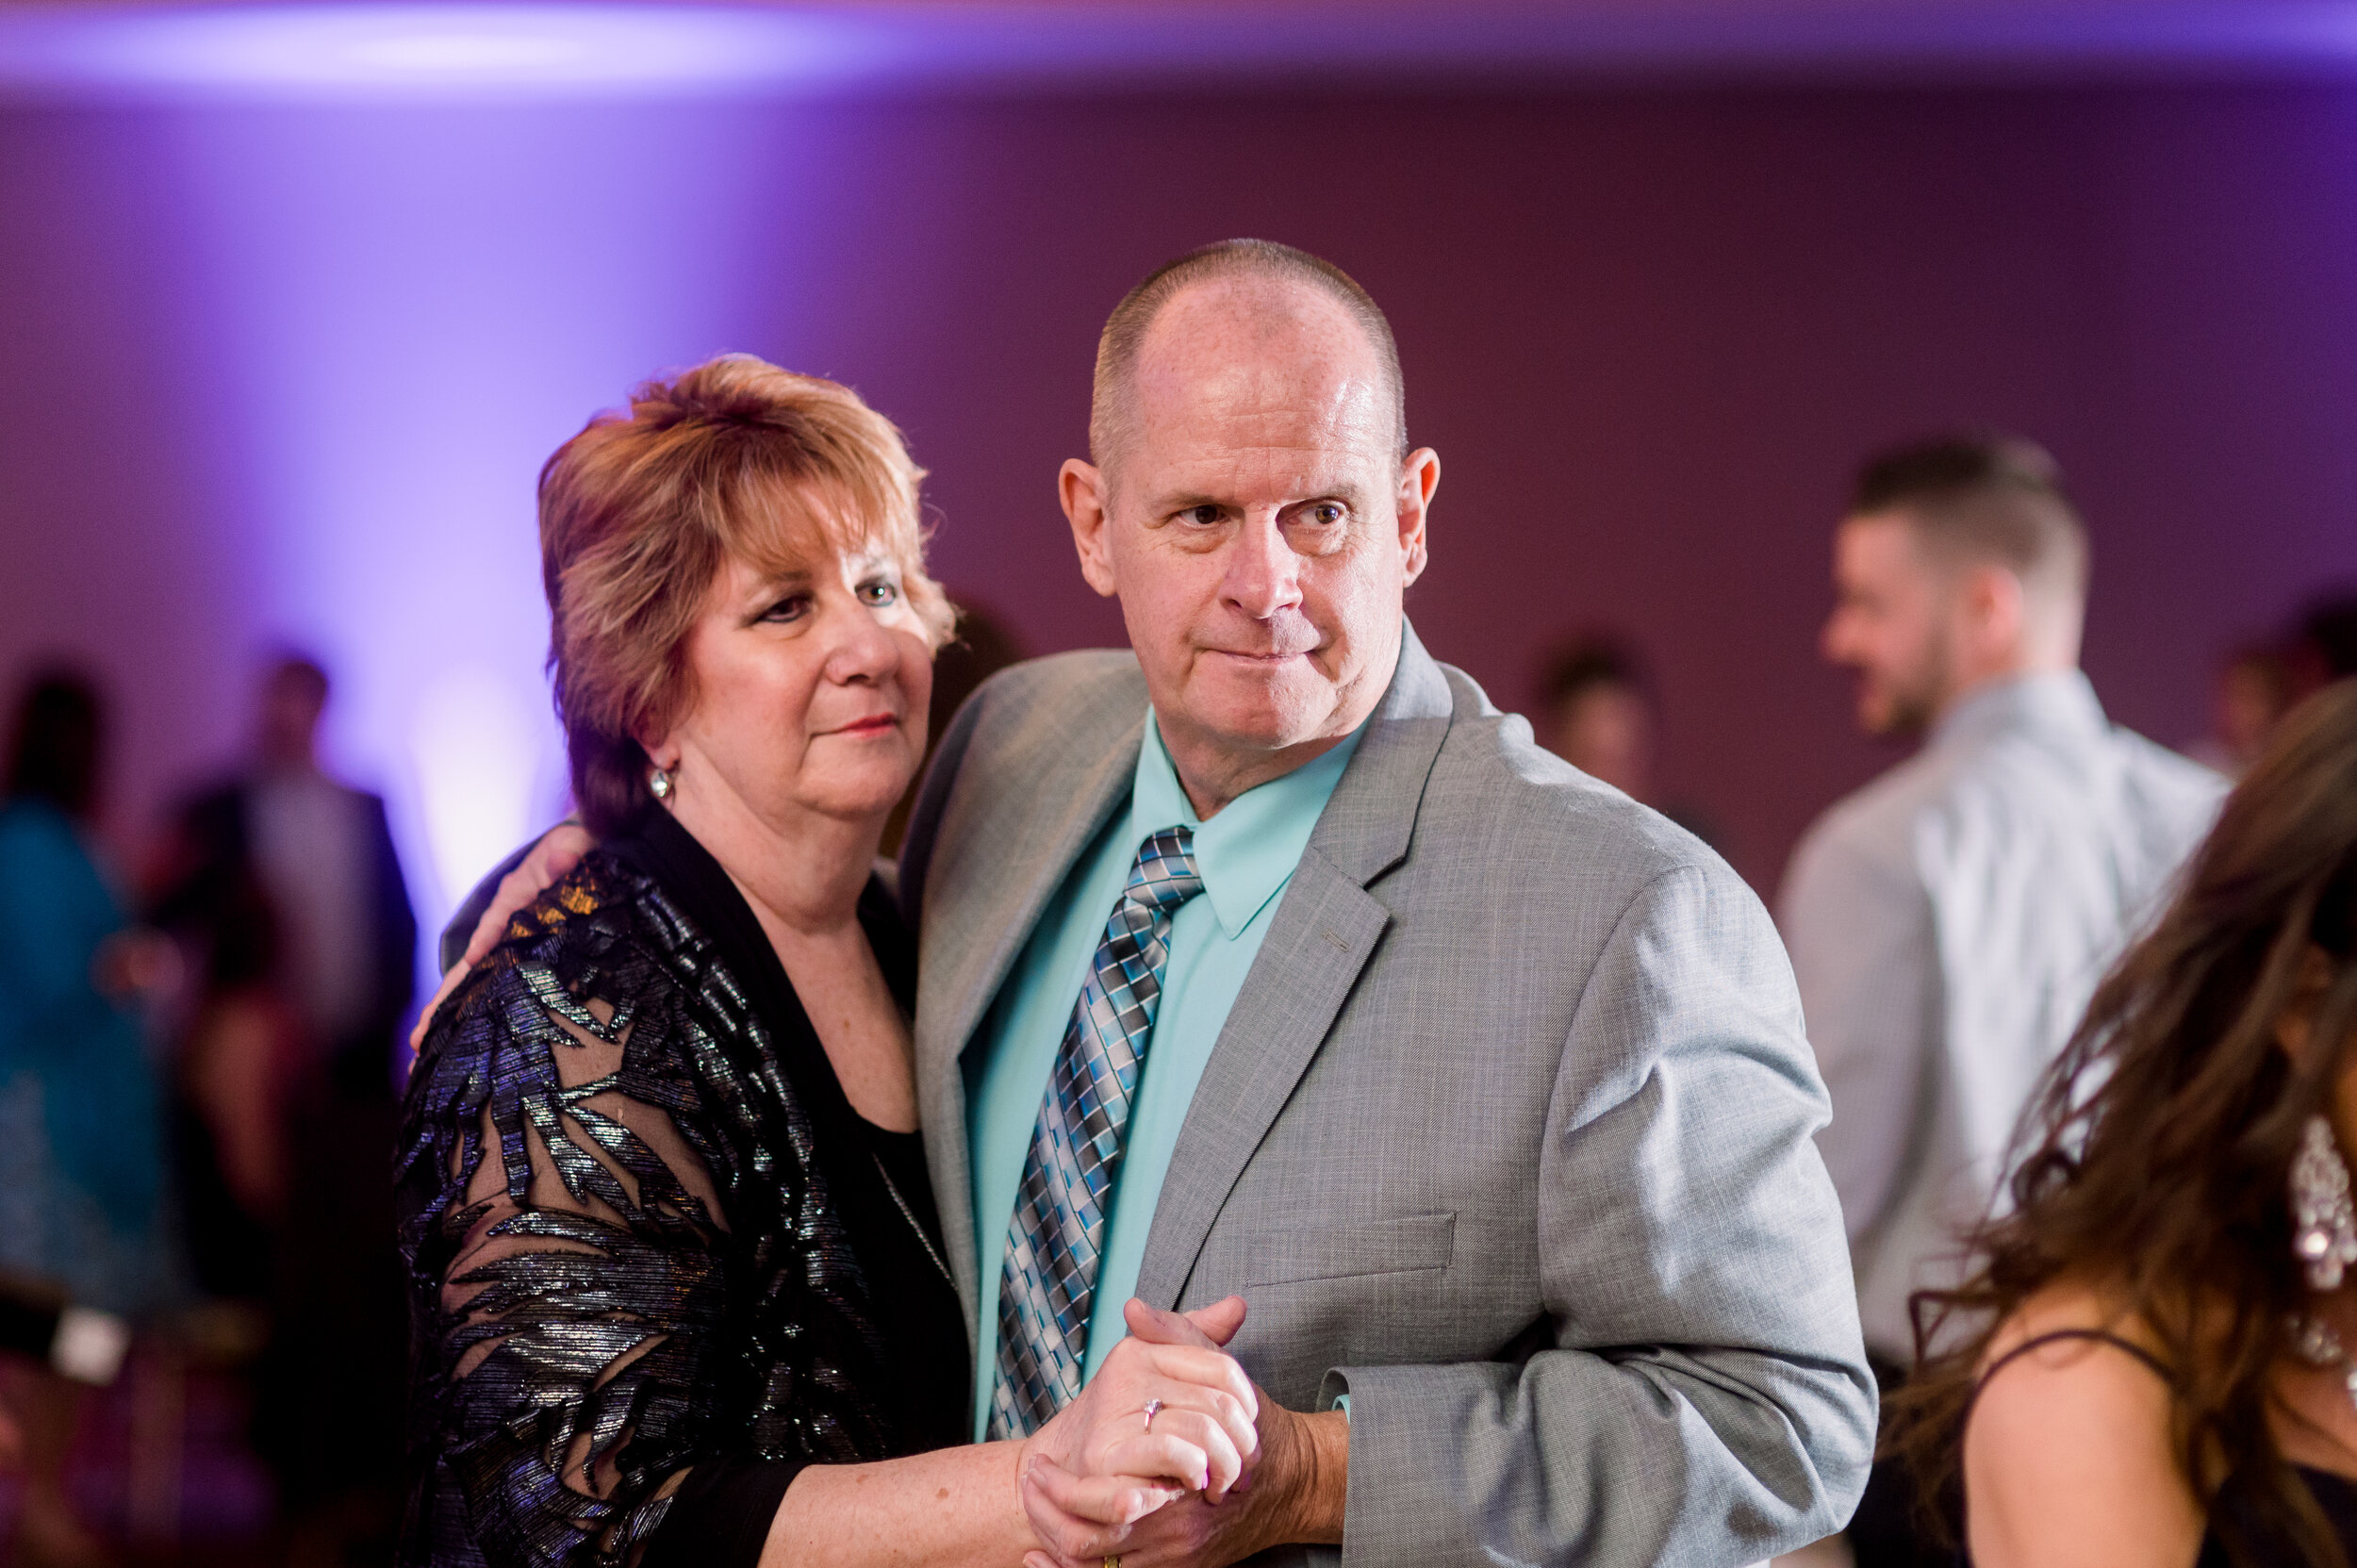 Weddings-at-The-DoubleTree-by-Hilton-Hotel-Pittsburgh-Ashley-Reed-Photography-83.jpg